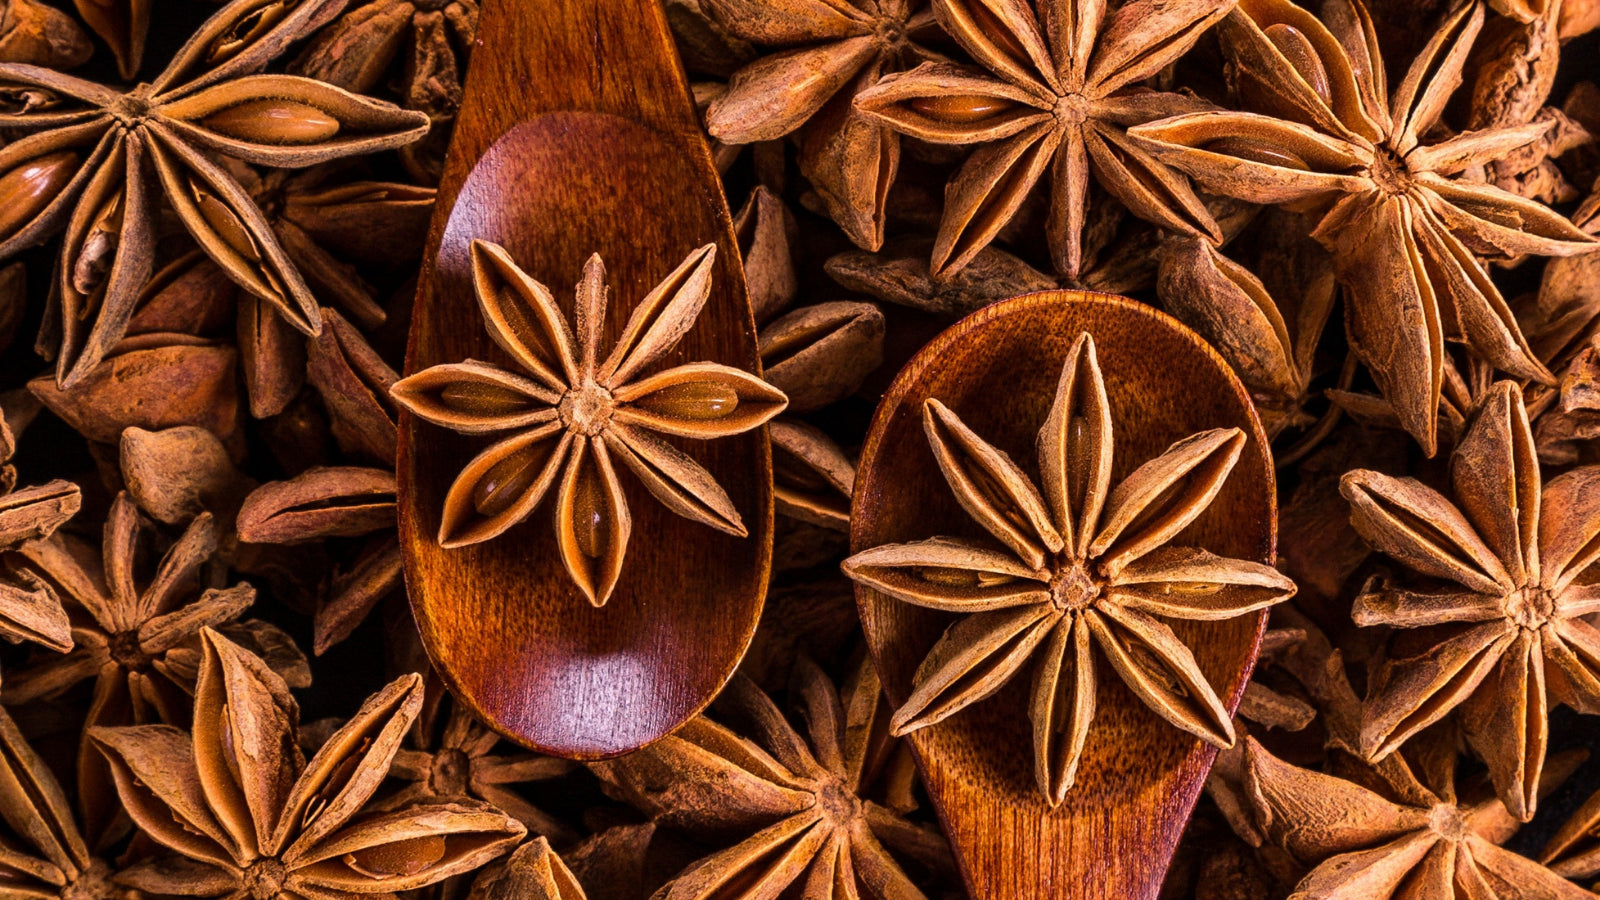 Star Anise Benefits: How Can You Use This Asian Cuisine Staple